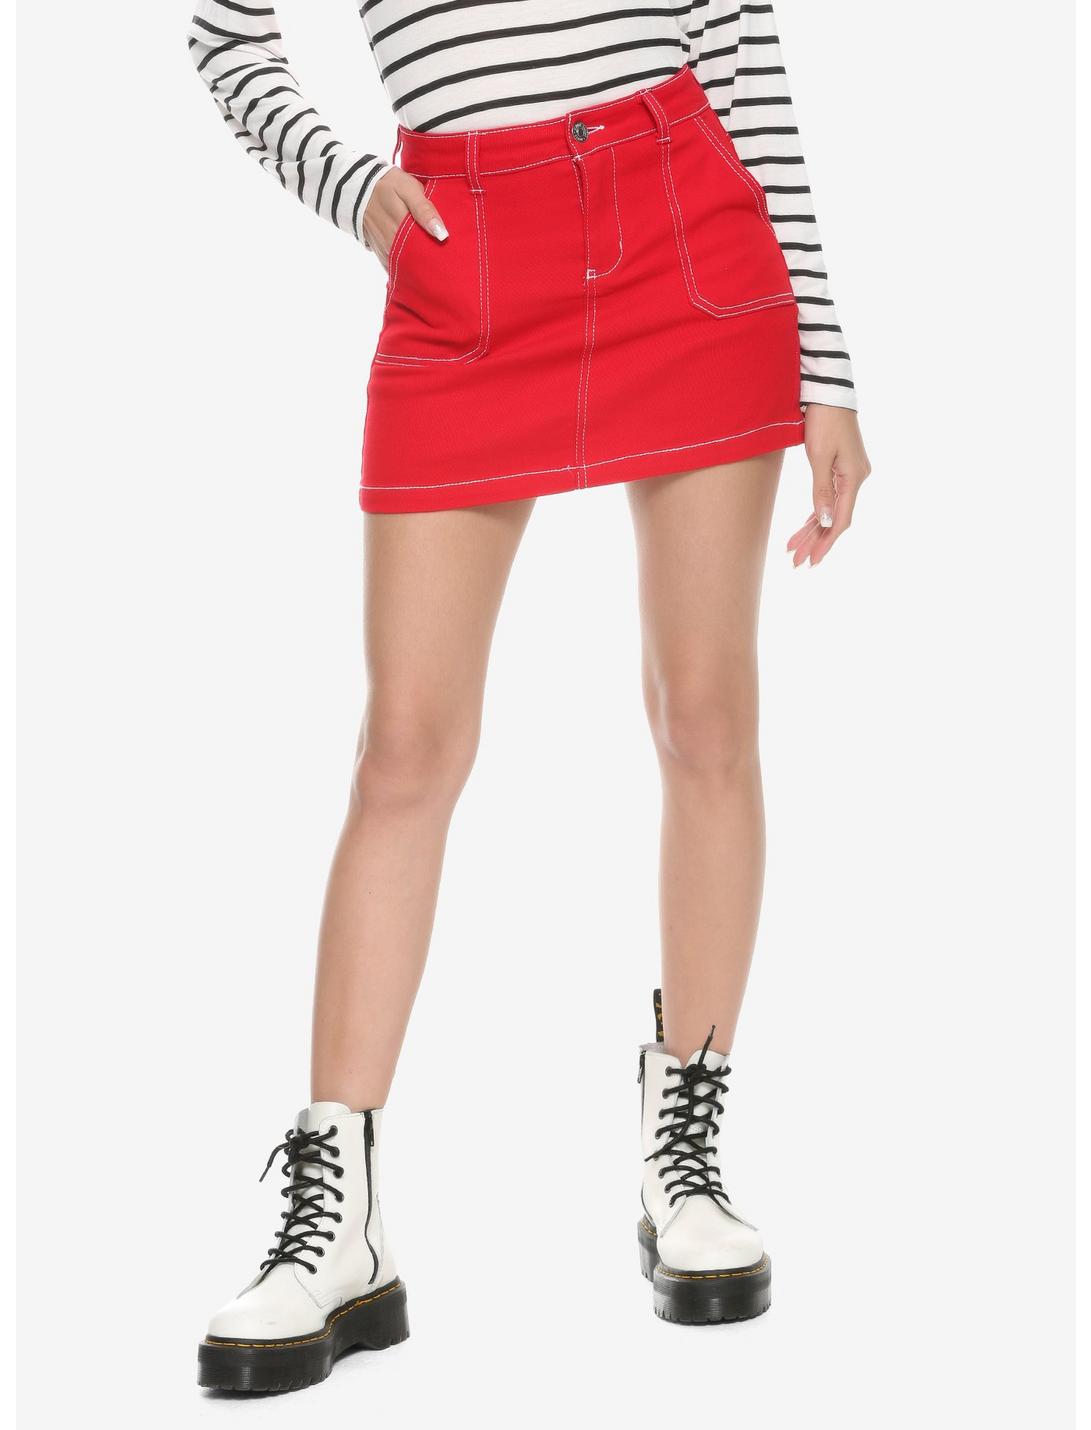 Almost Famous Red Mini Skirt, RED, hi-res